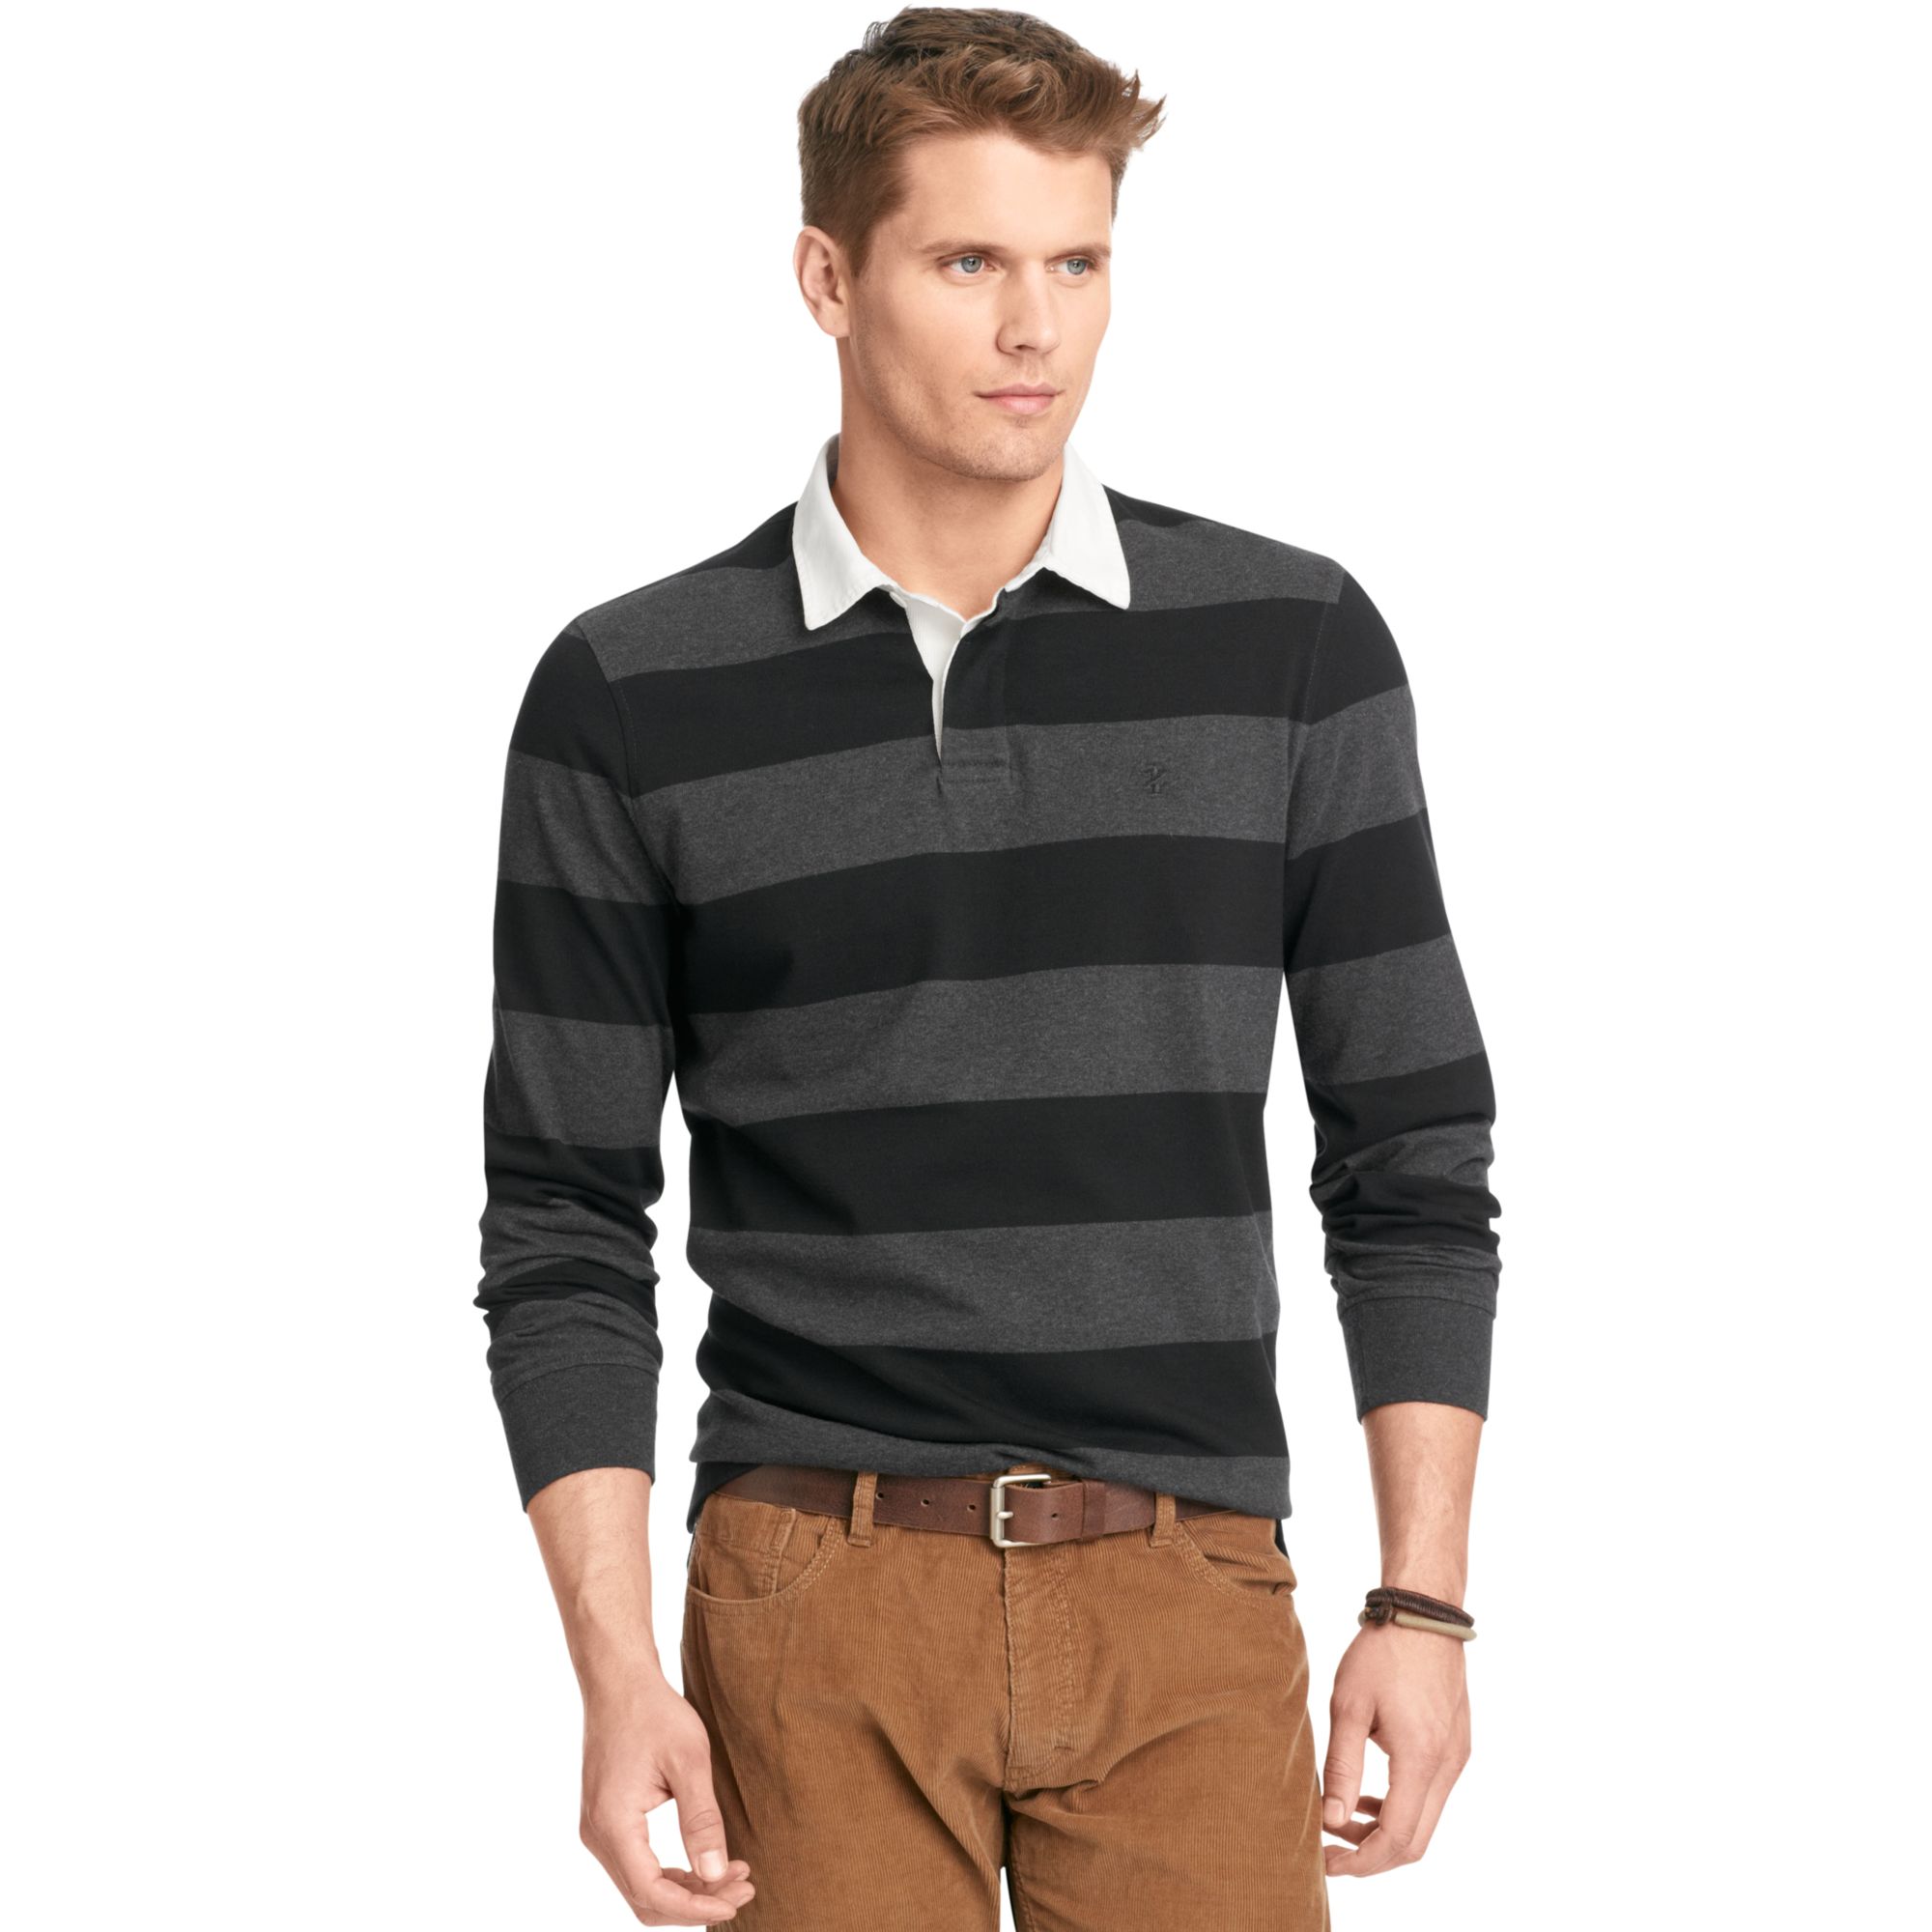 Lyst - Izod Izod Shirt Long Sleeve 5050 Striped Rugby Polo in Black for Men